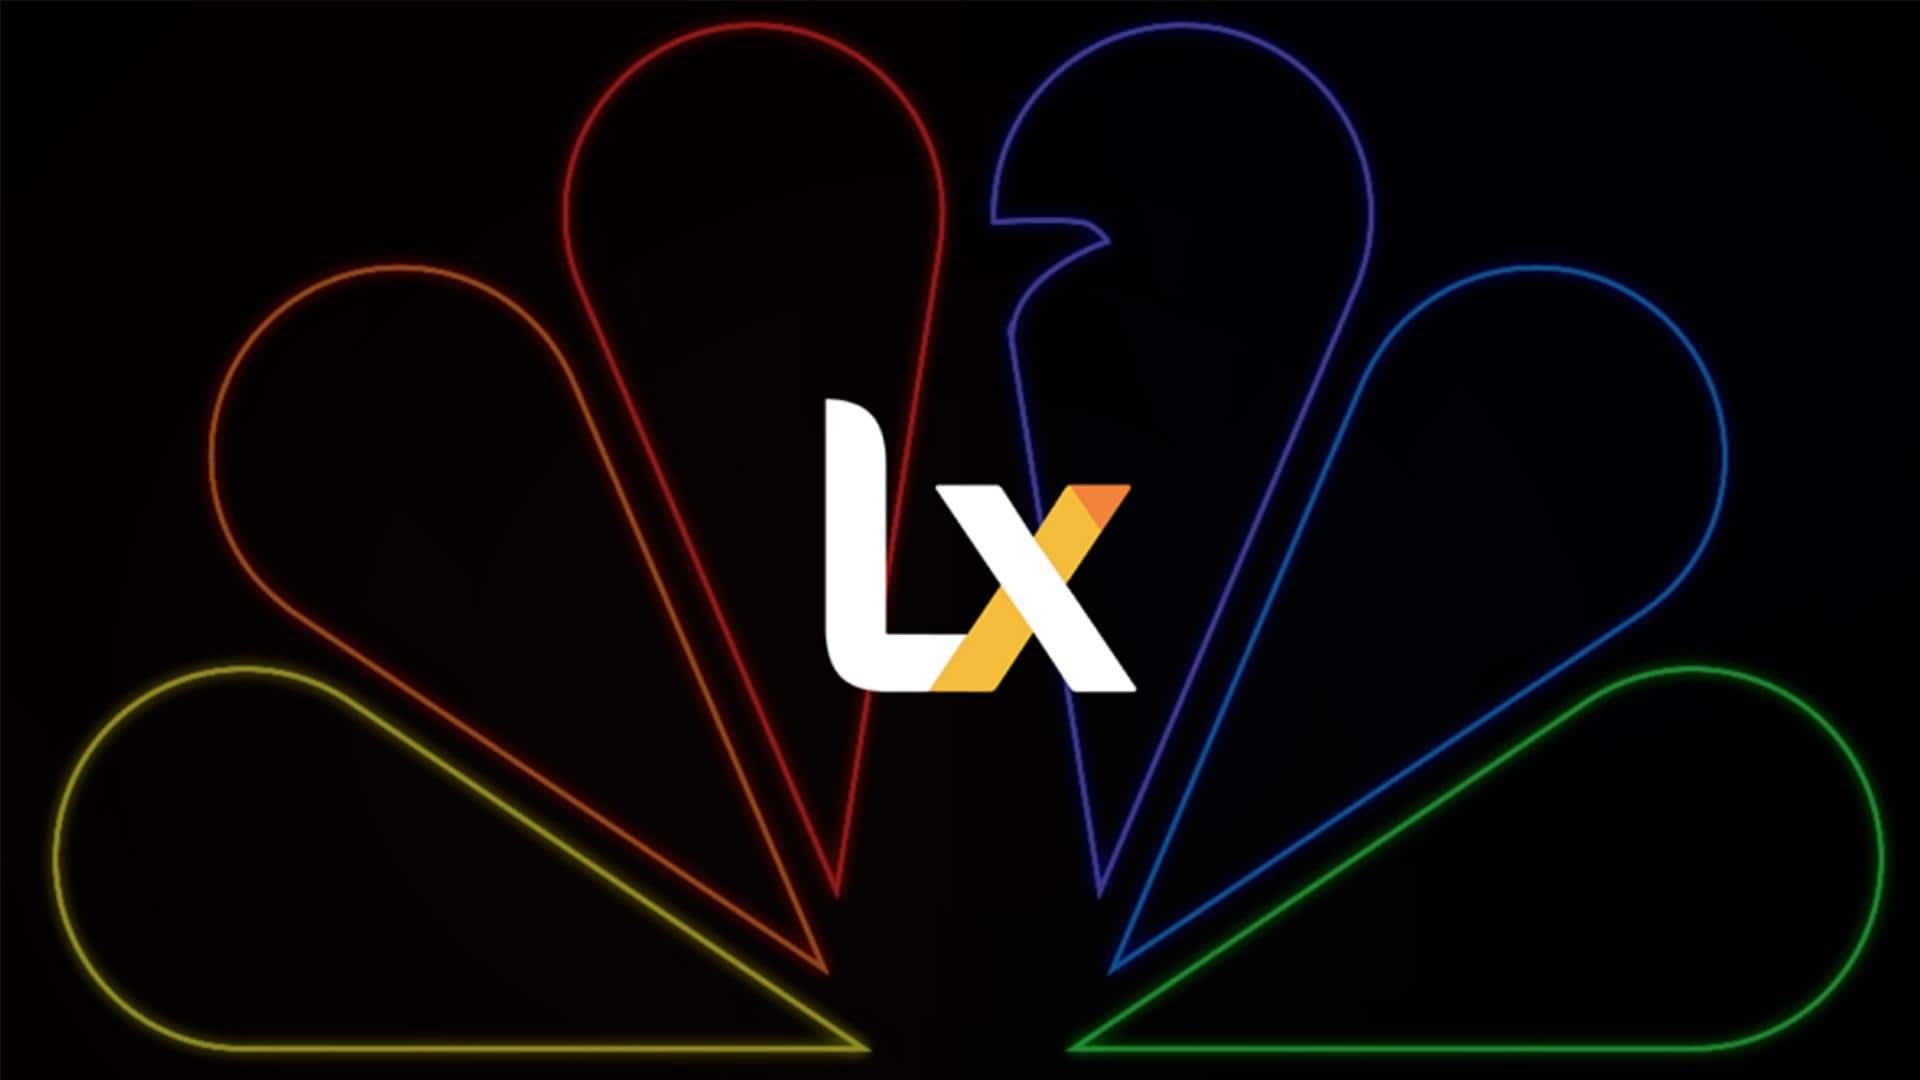 NBCUniversal to shut down LX in mid 2023